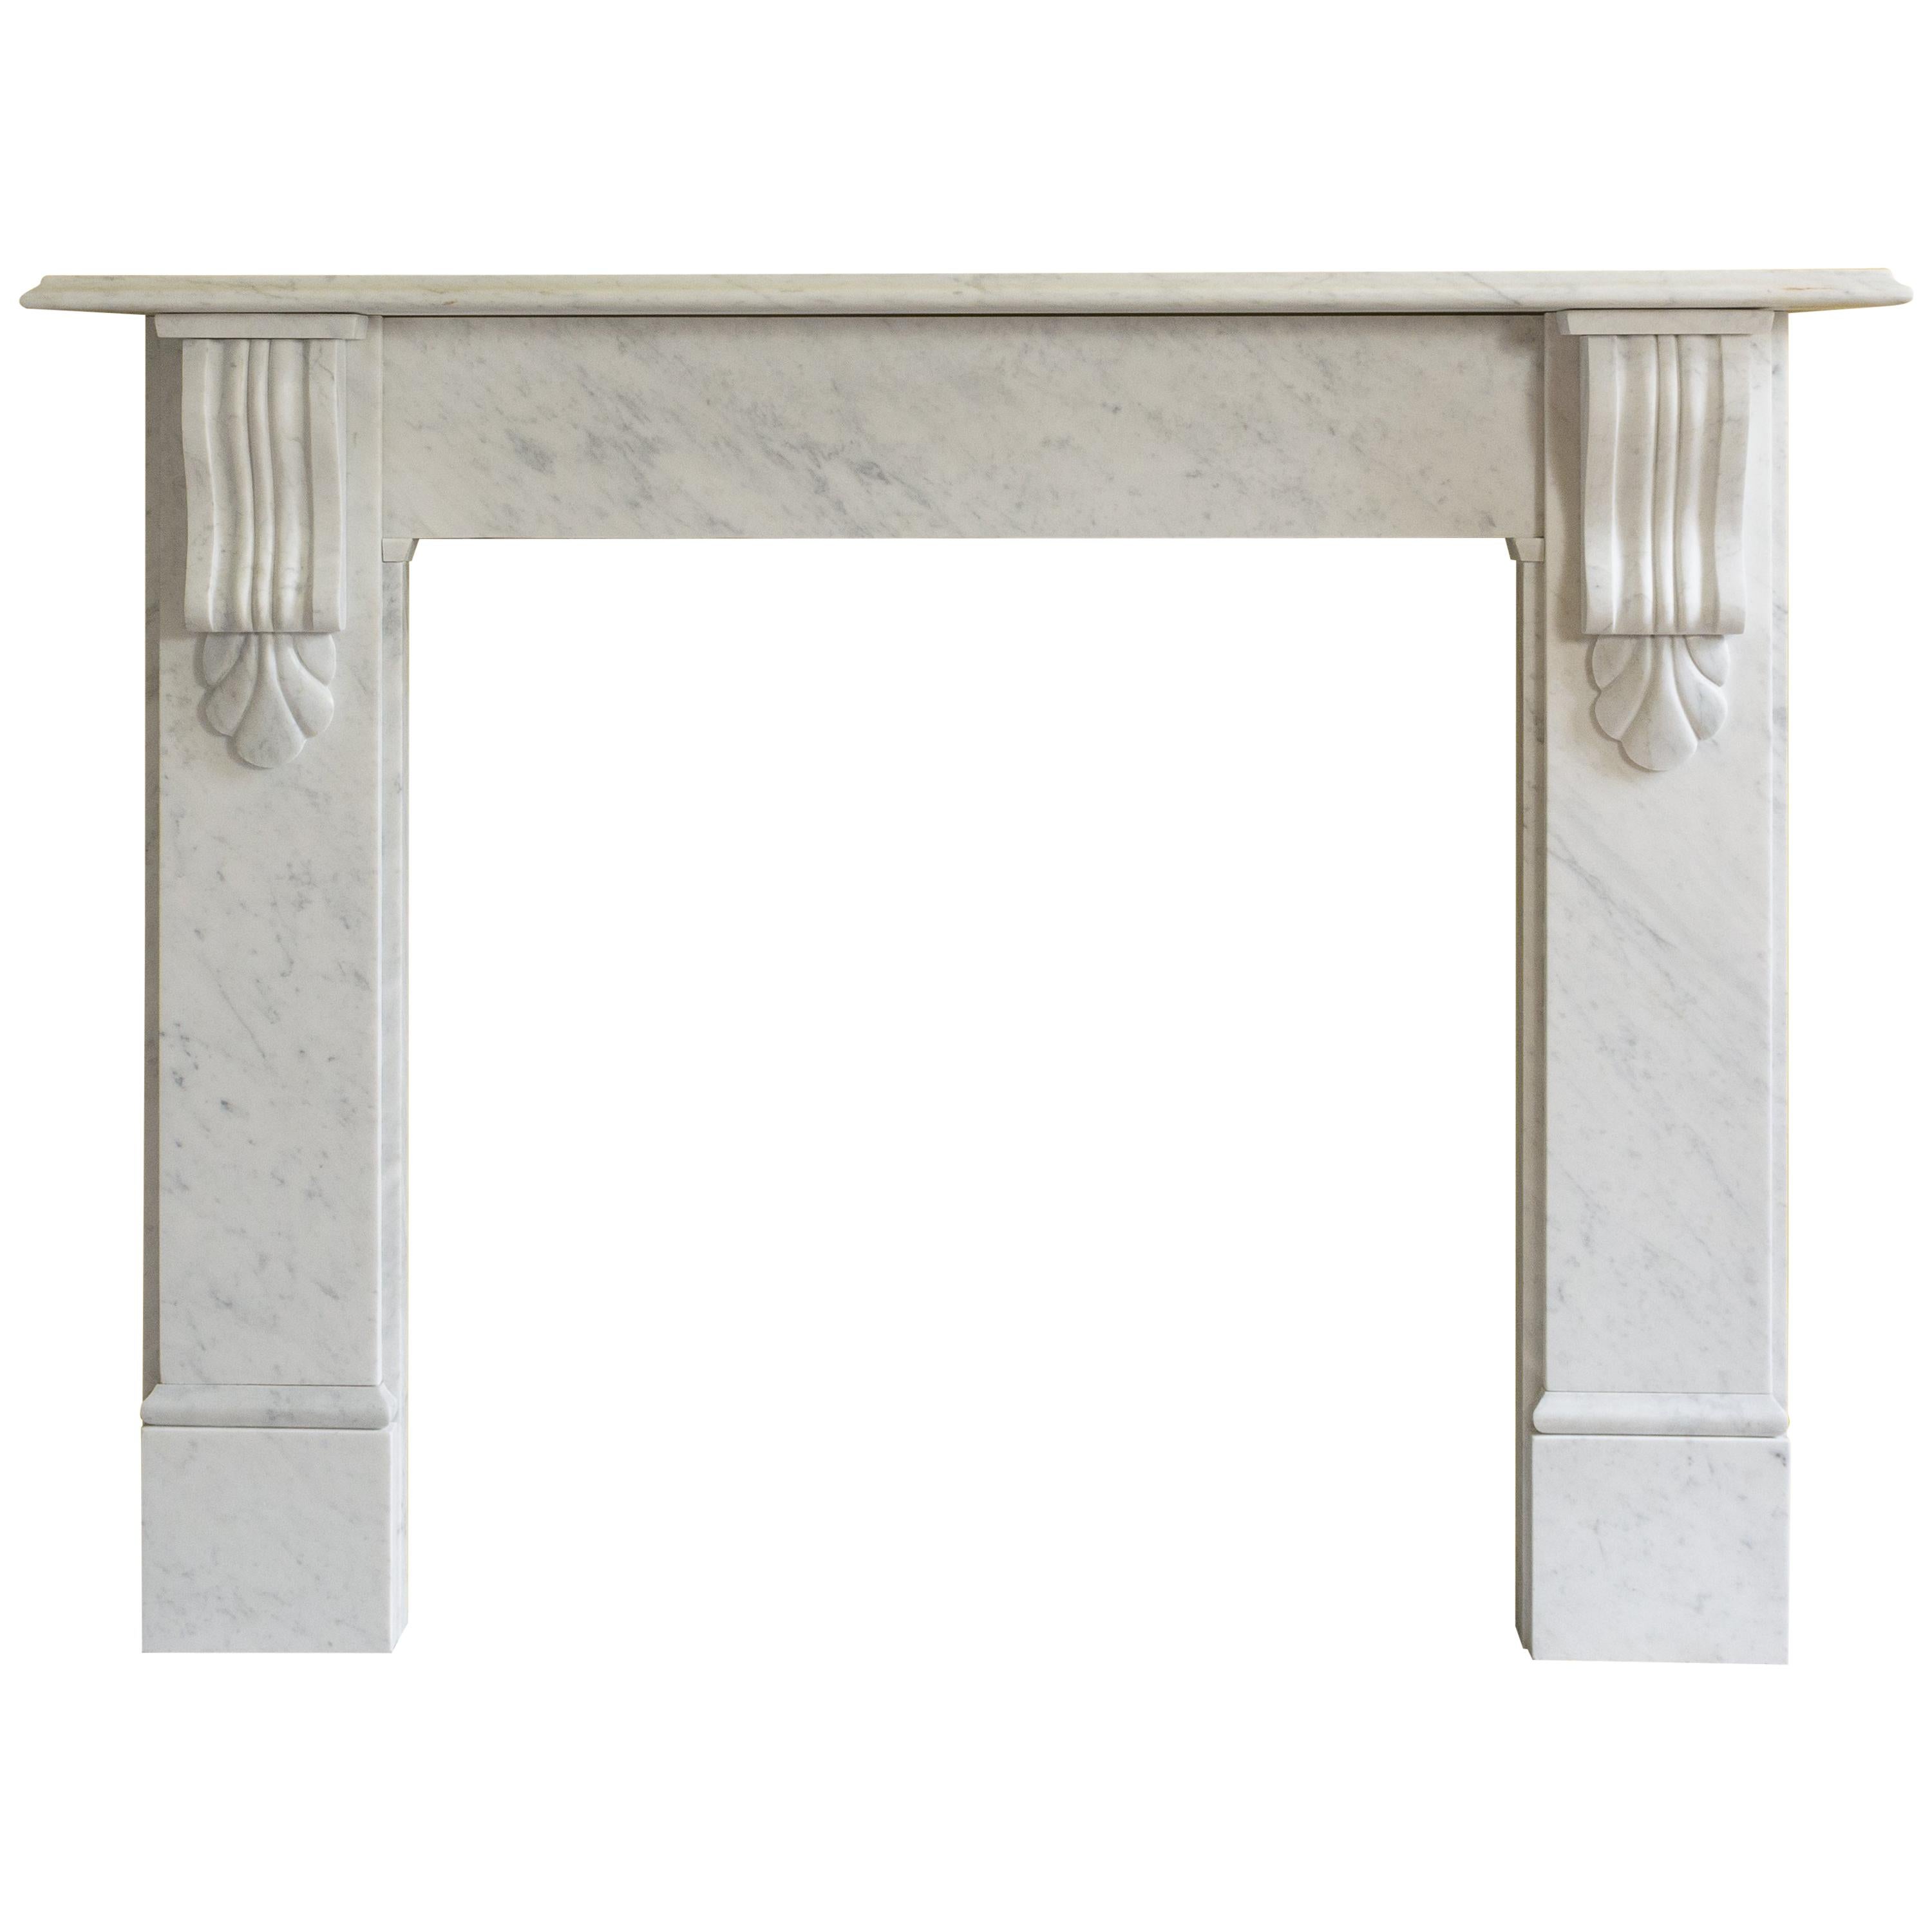 Victorian Style Carrara Marble Fireplace